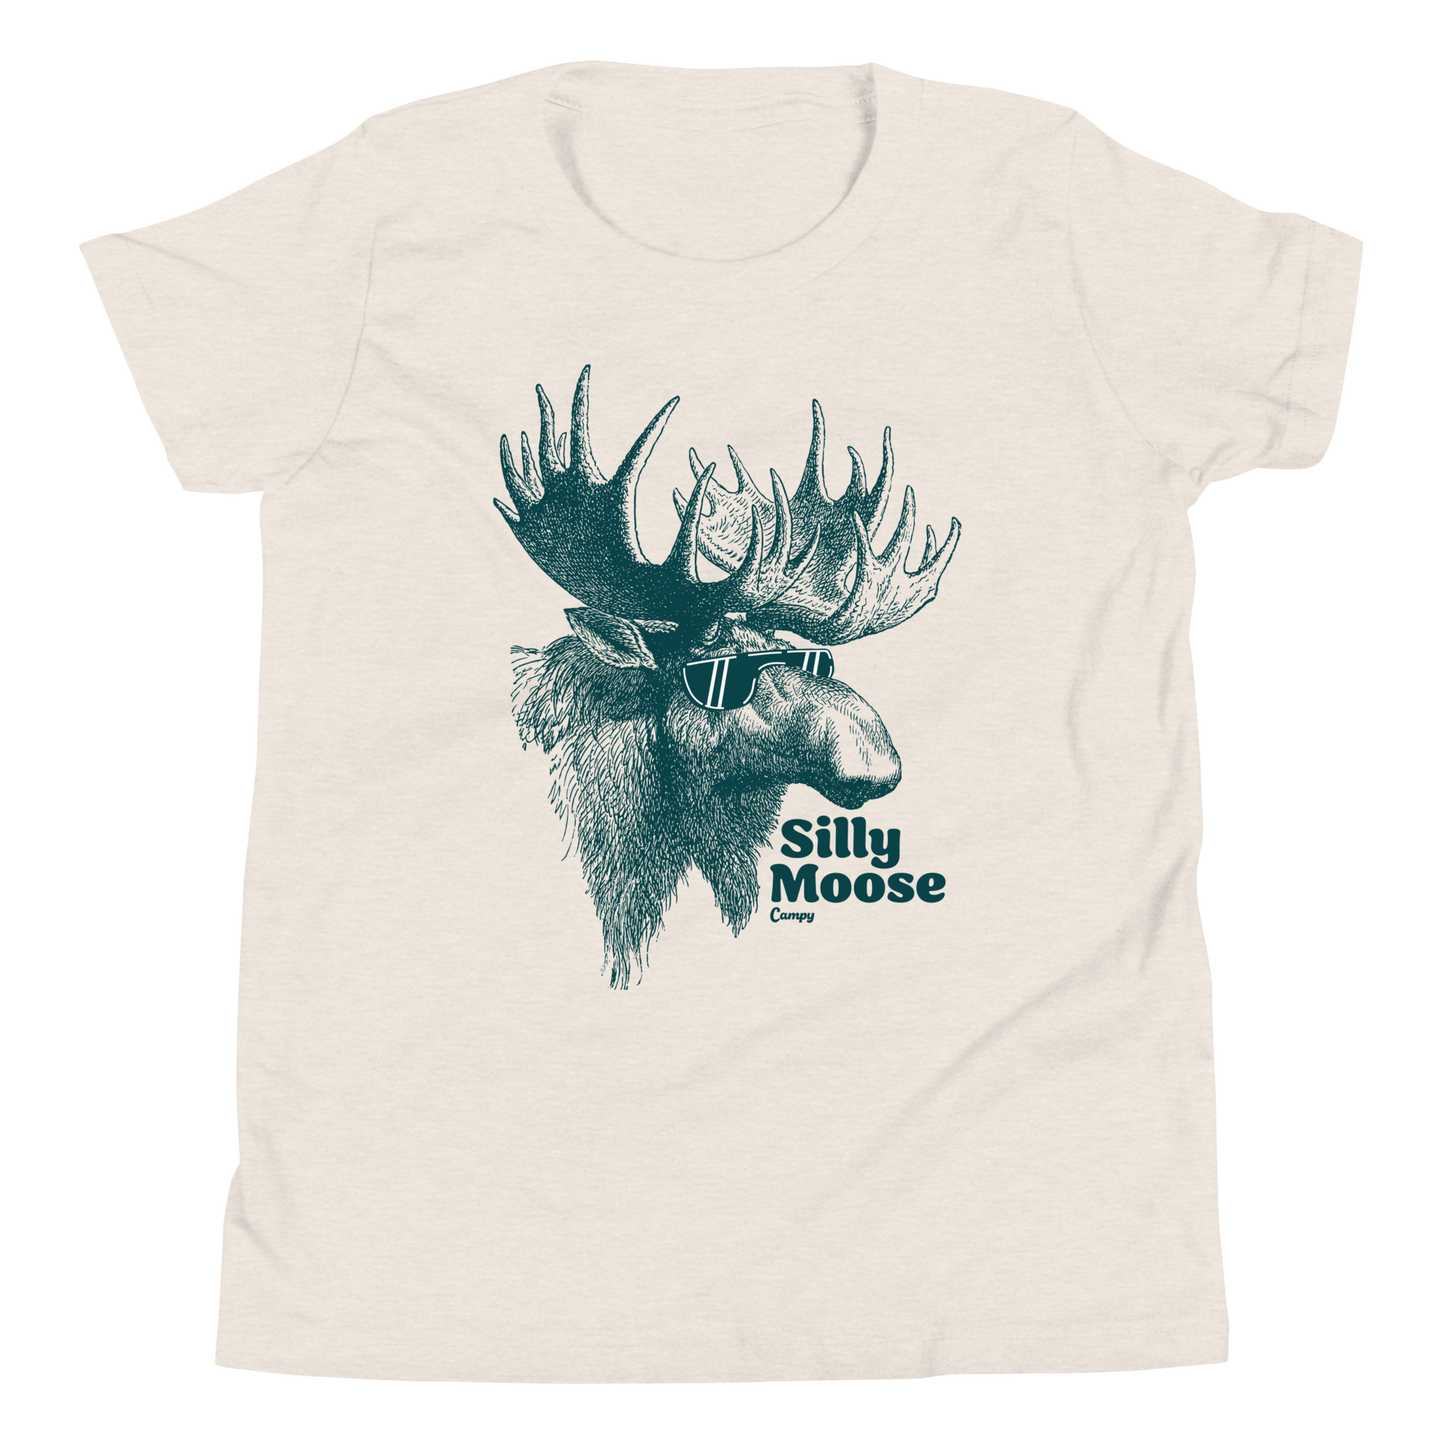 Silly Moose Youth Tee